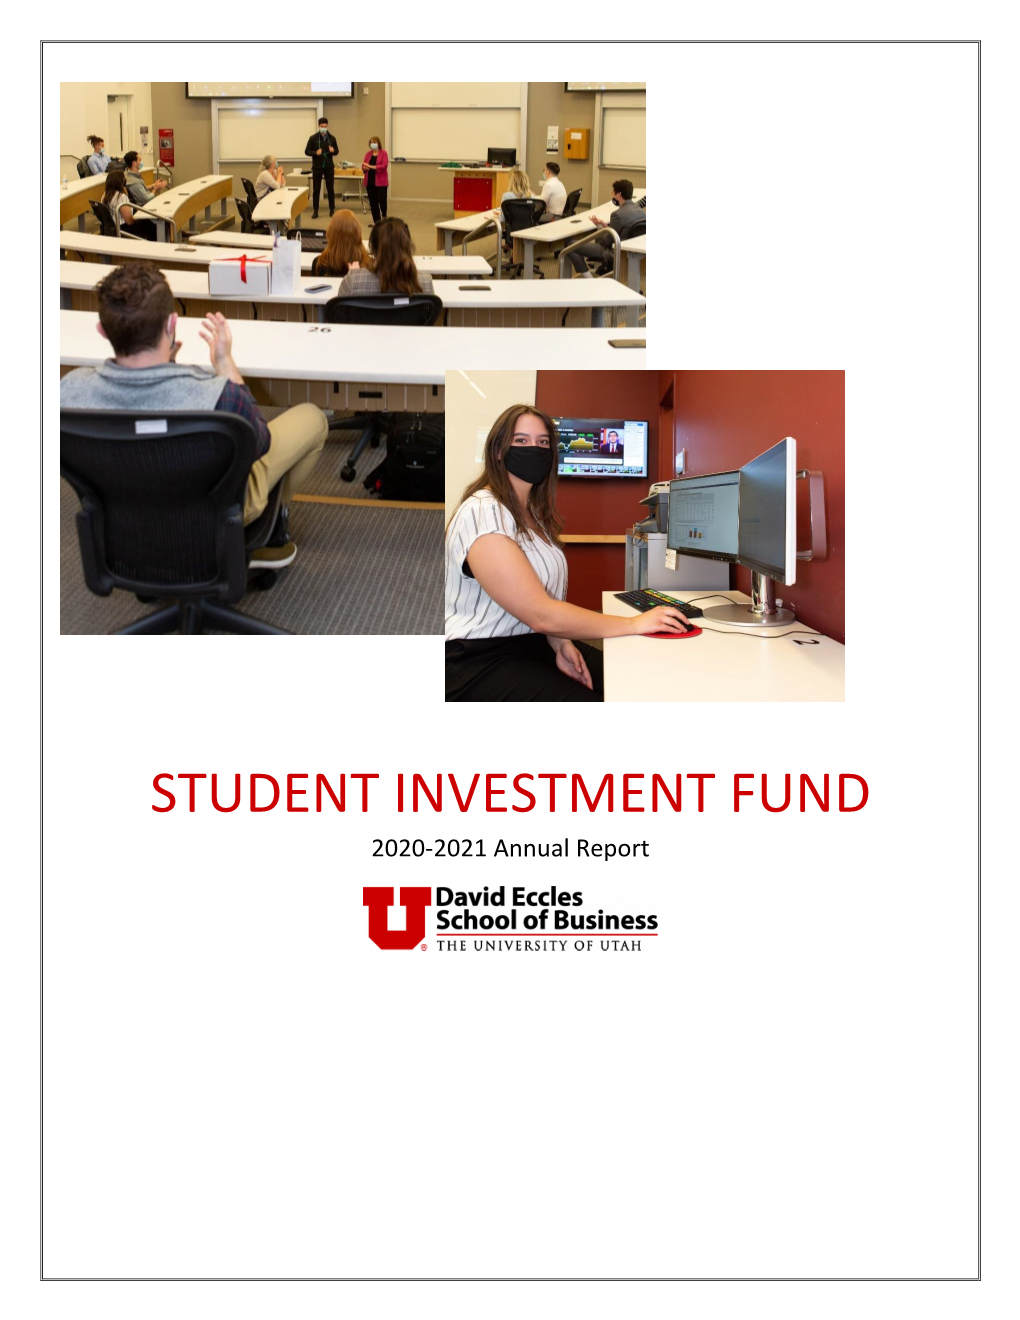 STUDENT INVESTMENT FUND 2020-2021 Annual Report